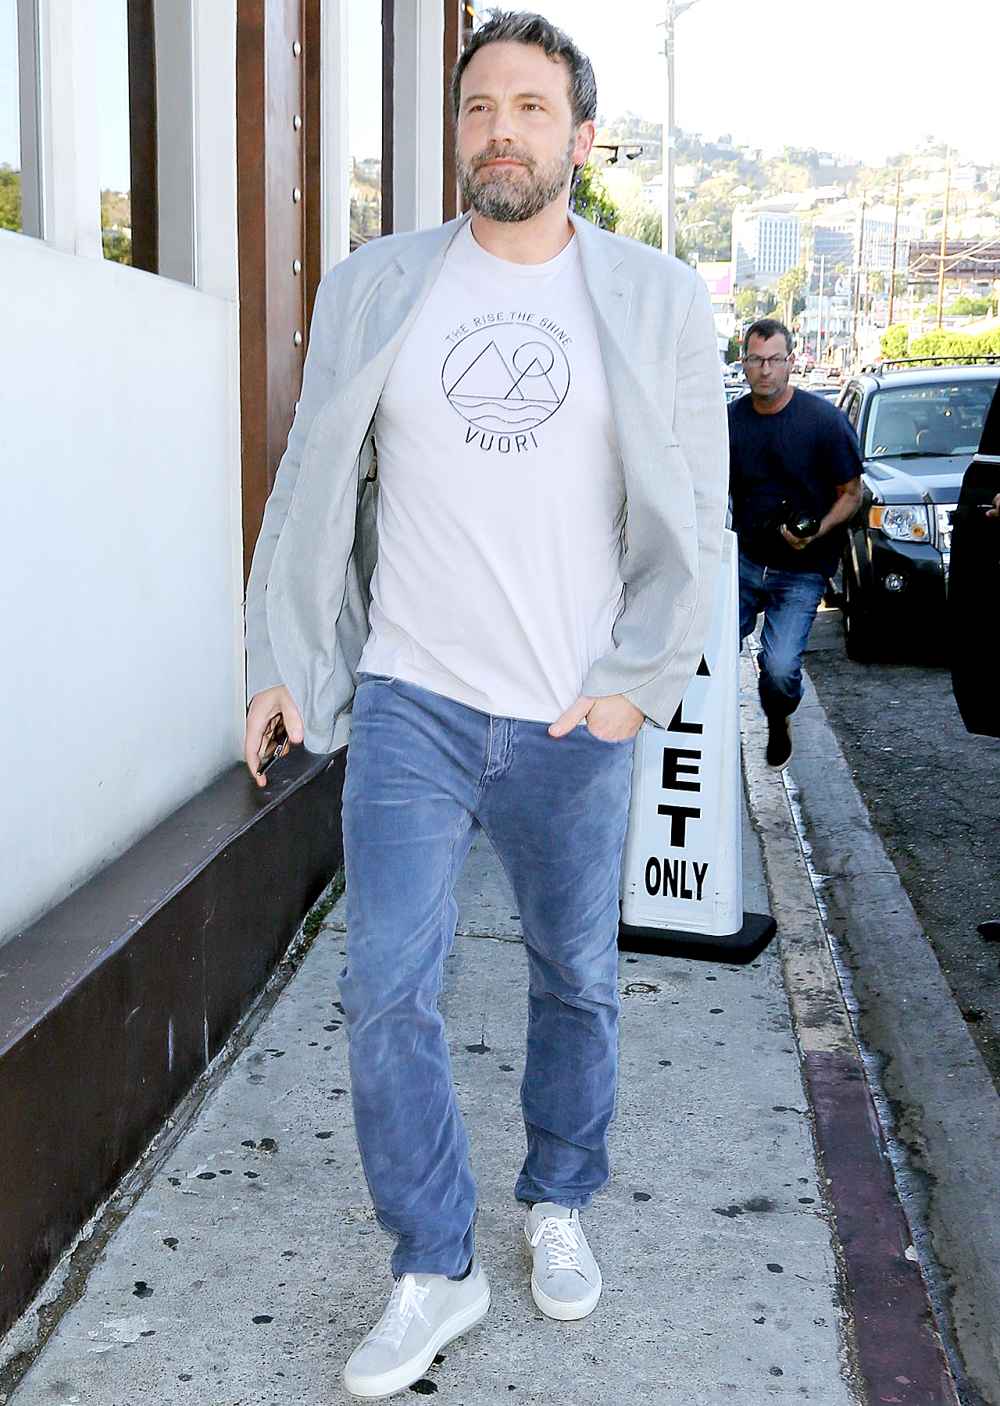 Ben Affleck celebrates his 45th birthday at Barton G. The Restaurant with his kids.